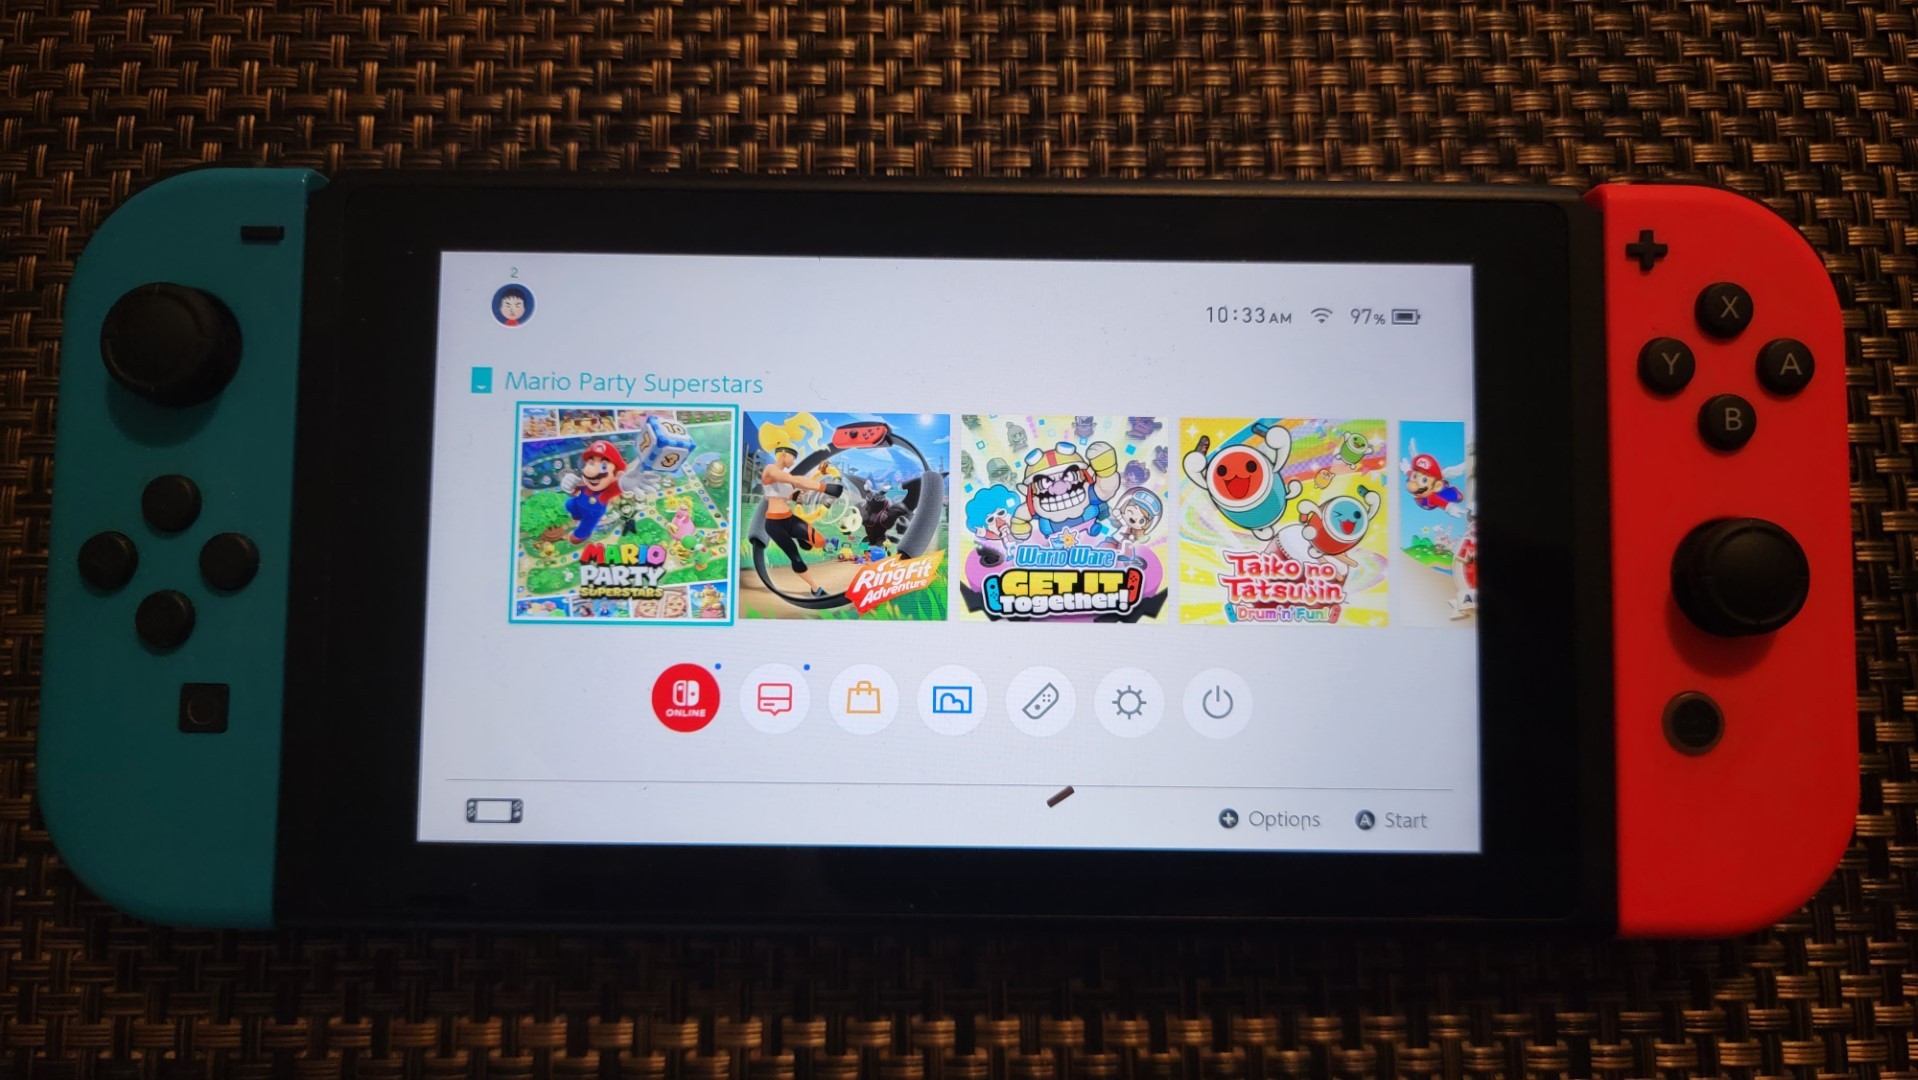 Mario Party Superstars Nintendo Switch - Nintendo Switch Menu with Game inserted.